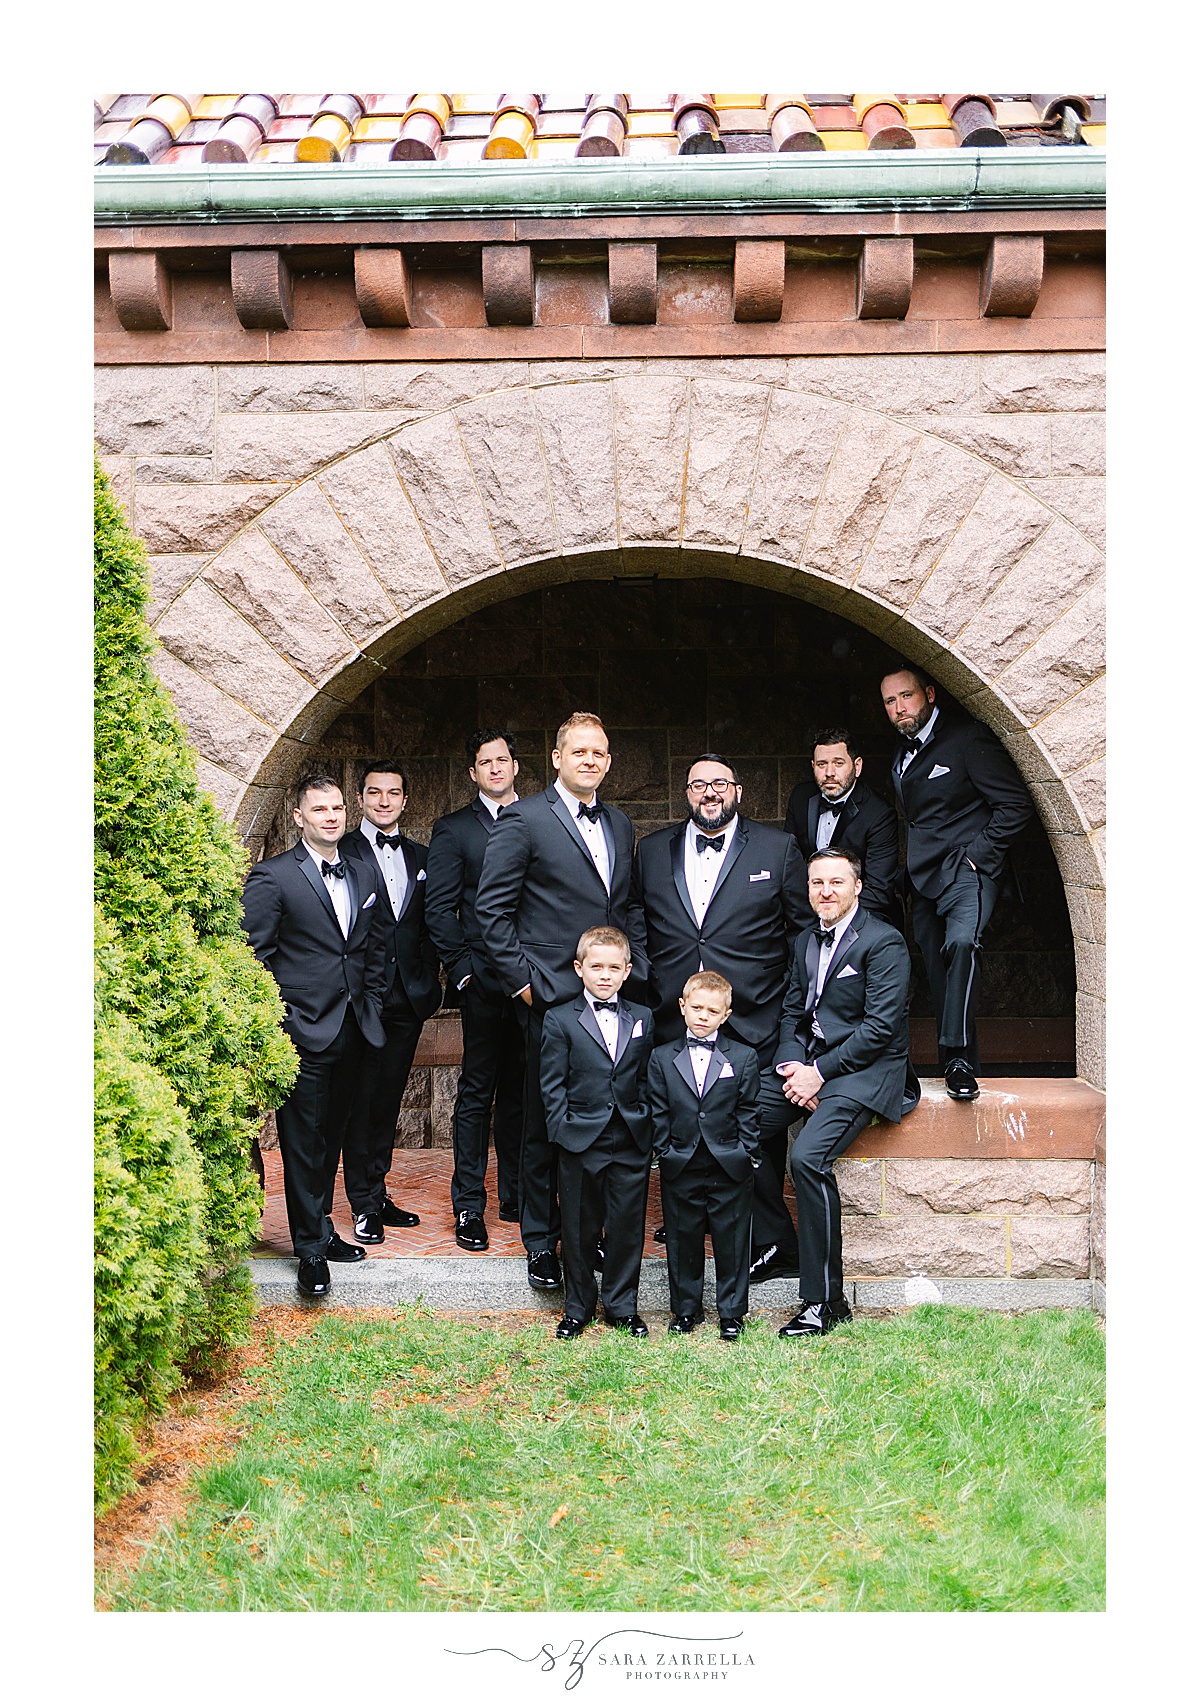 portraits of groom and groomsmen in classic black tuxes